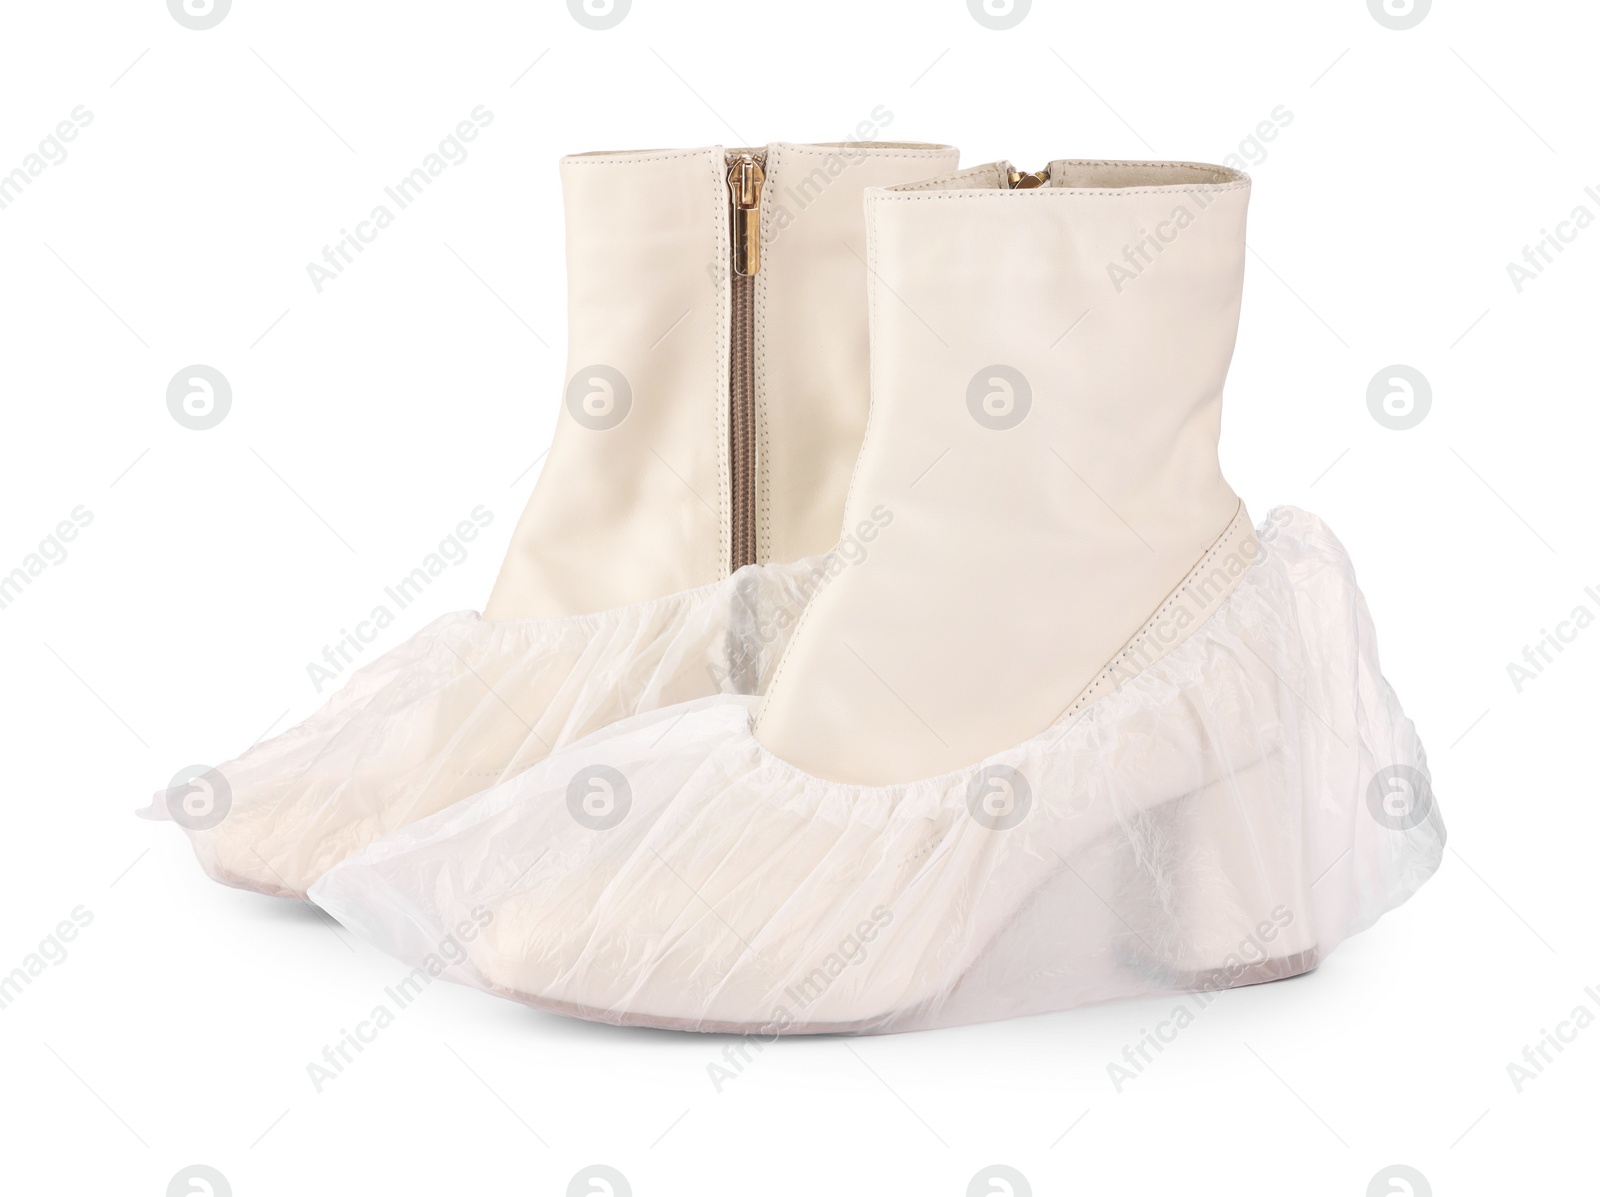 Photo of Women's boots in shoe covers isolated on white